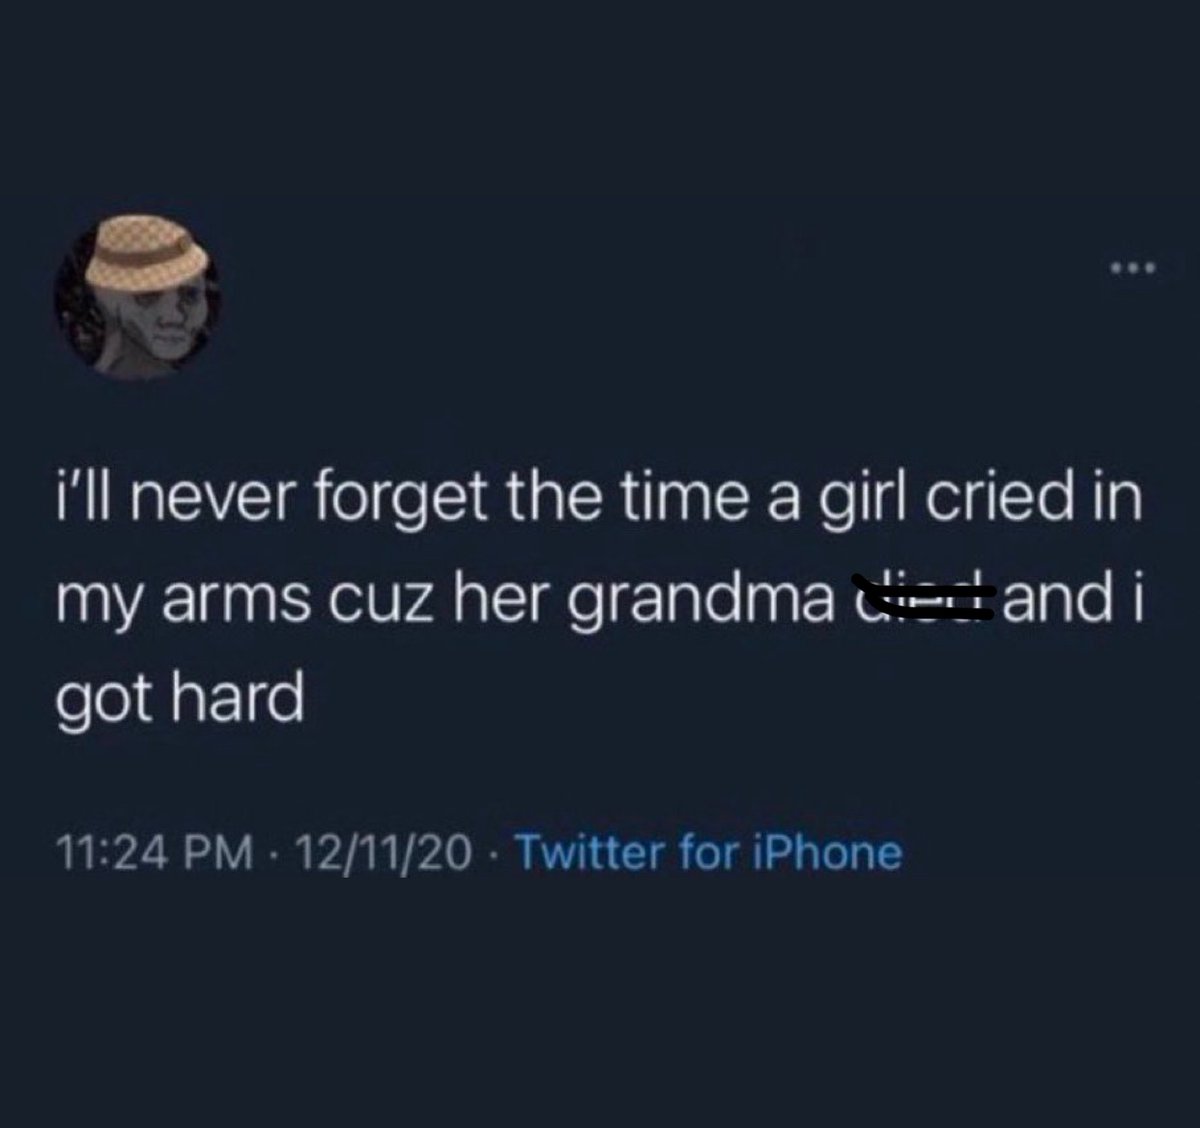 Dude's Taking L's Online - atmosphere - i'll never forget the time a girl cried in my arms cuz her grandma and i got hard 121120 Twitter for iPhone